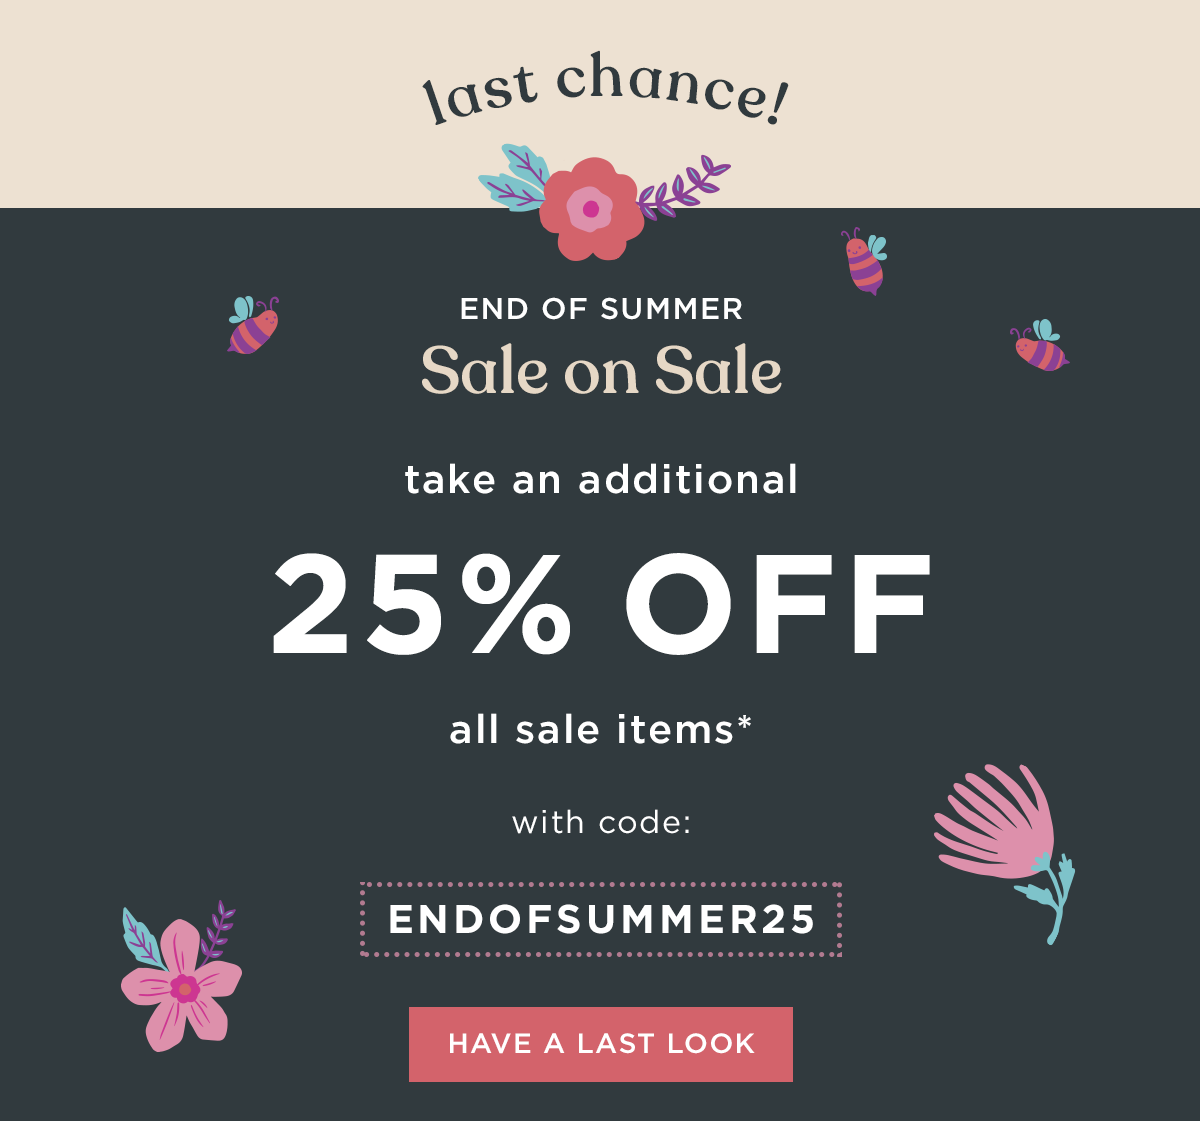 Sale on Sale! 25% off with promo code endofsummer25